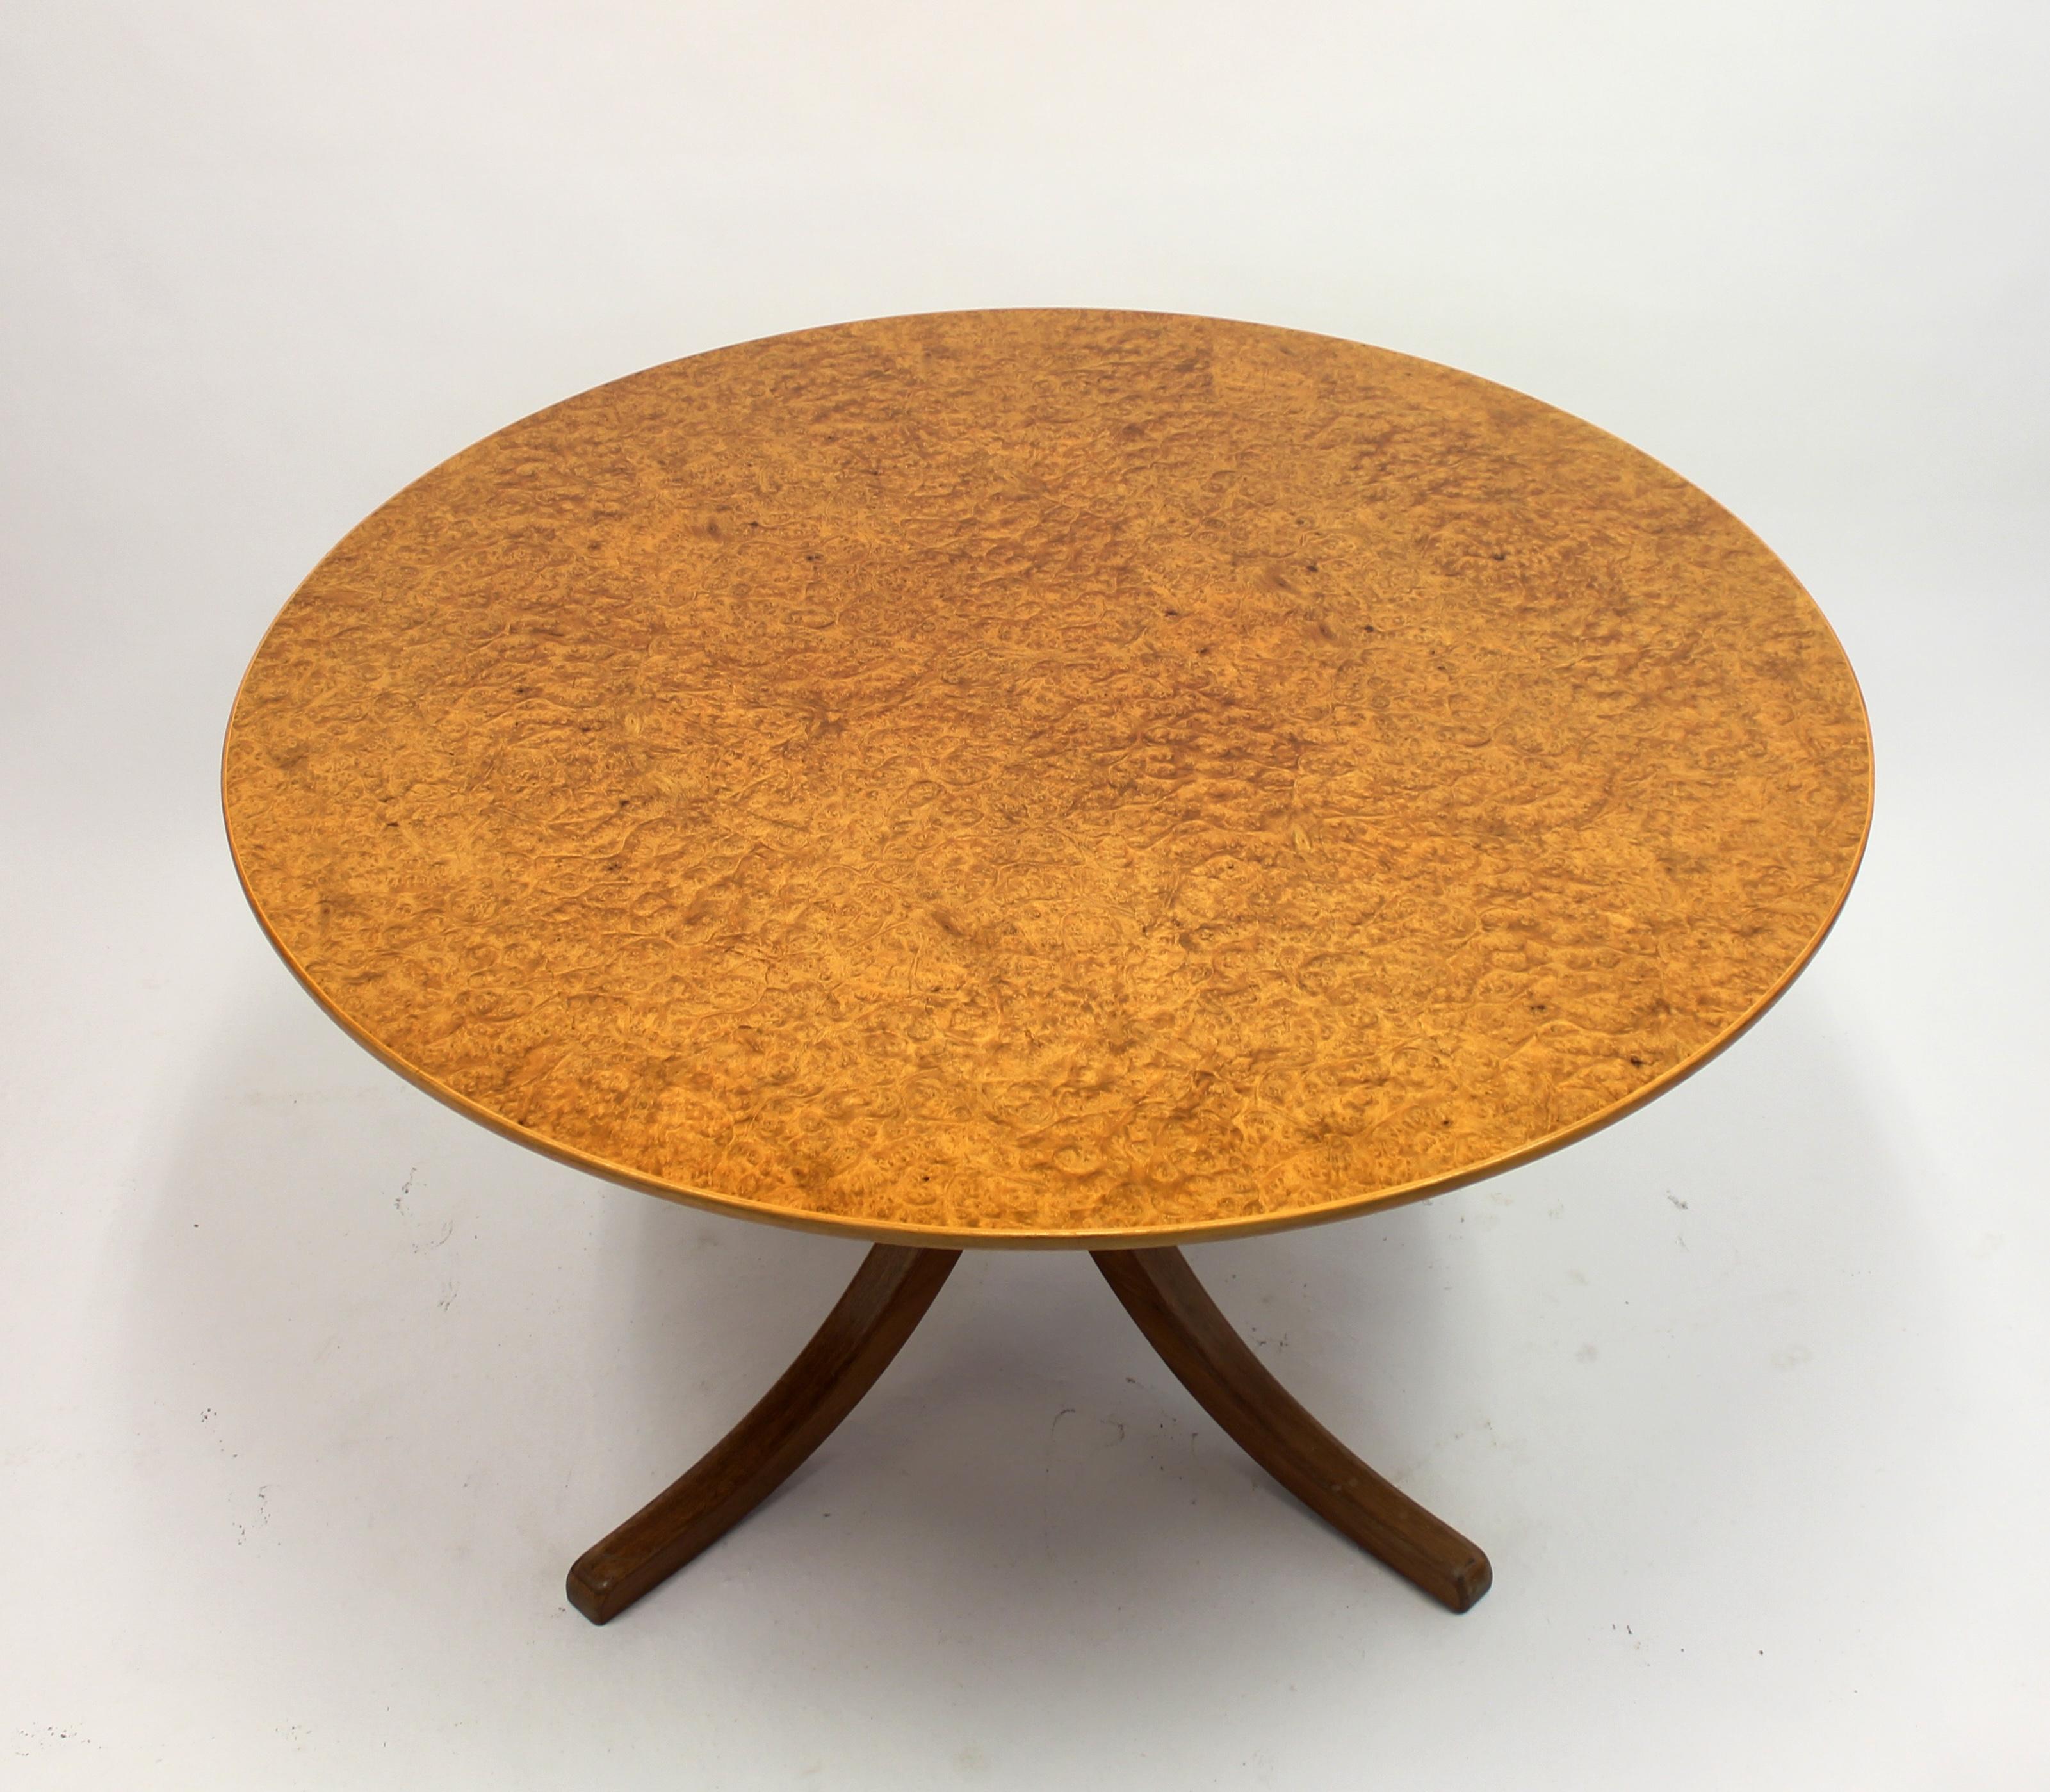 Dining table model 1020 designed by Josef Frank in the late 1930s for Svenskt Tenn. This example is from the 1960s and has, up until now, been in the same family since it was bought back then. Tabletop in root veneer (most likely alder root or elm